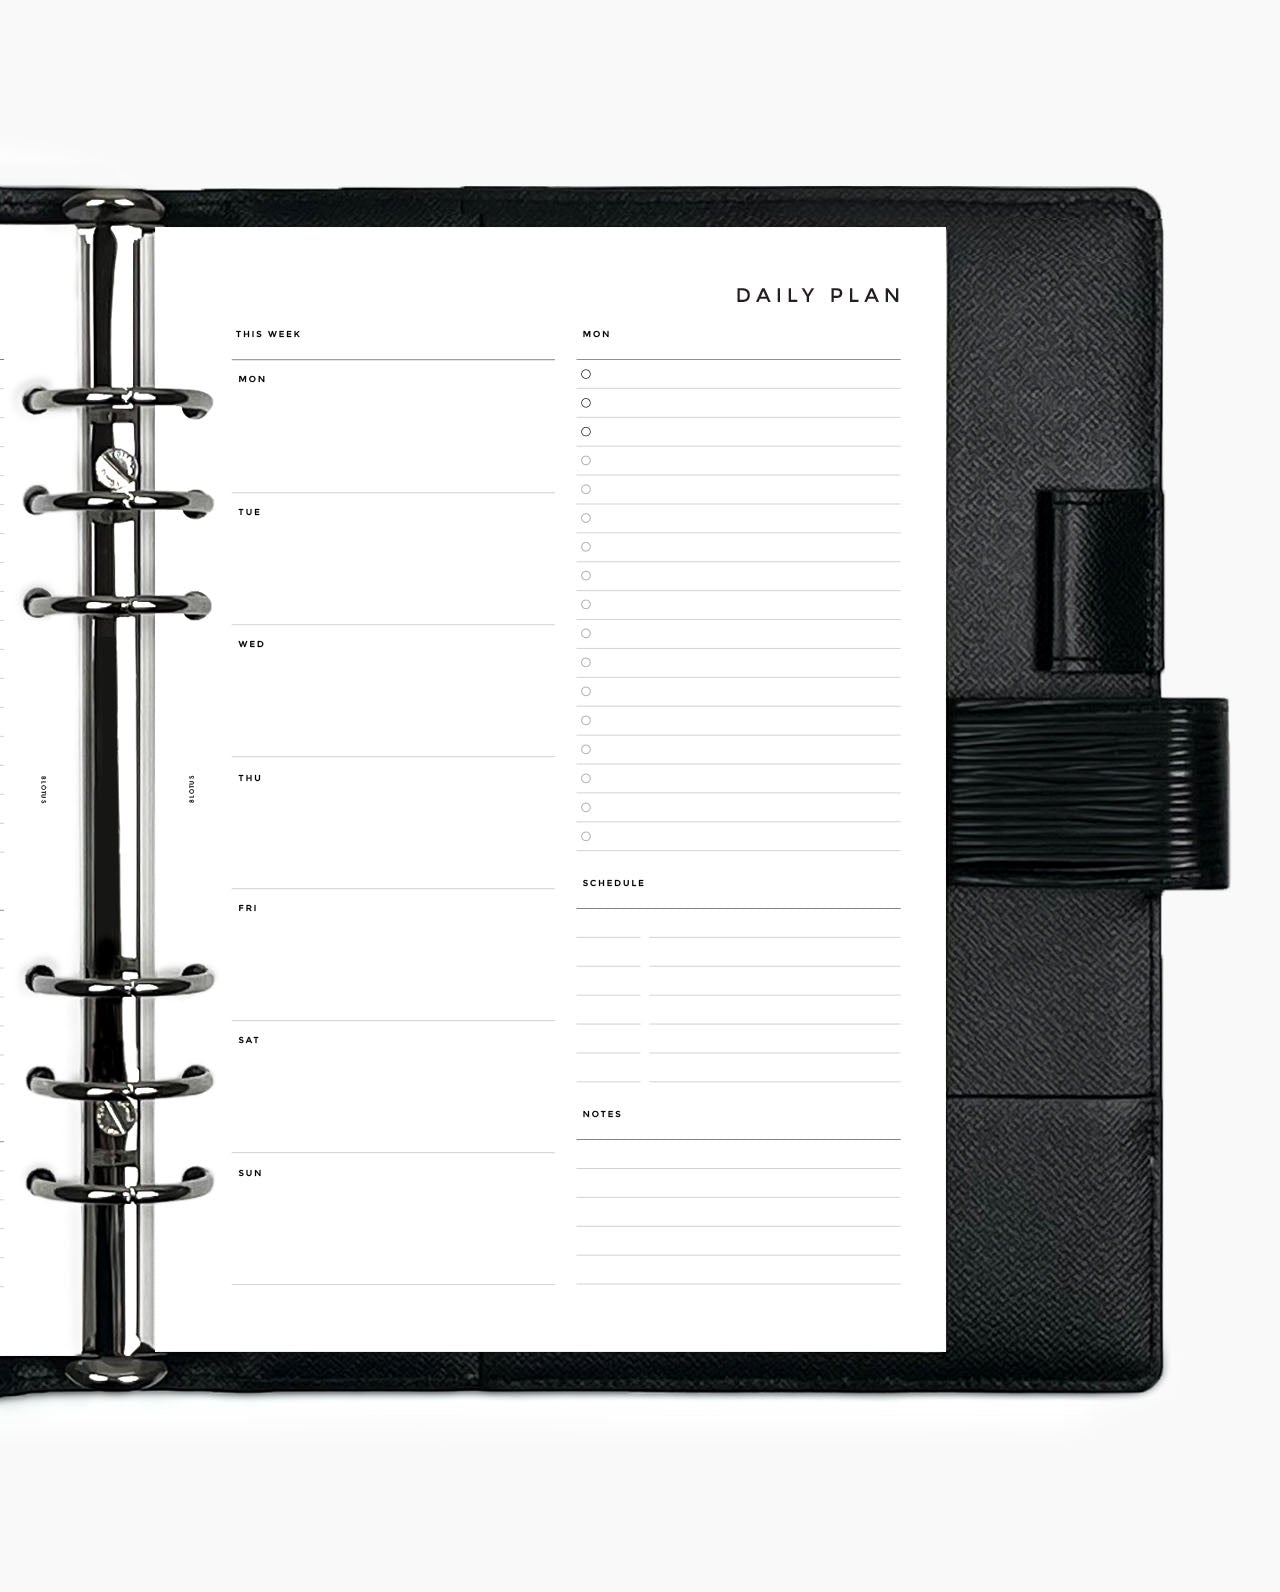 MN080 - Daily Planner - To Do, Schedule, Notes - 2D01P / WO4P